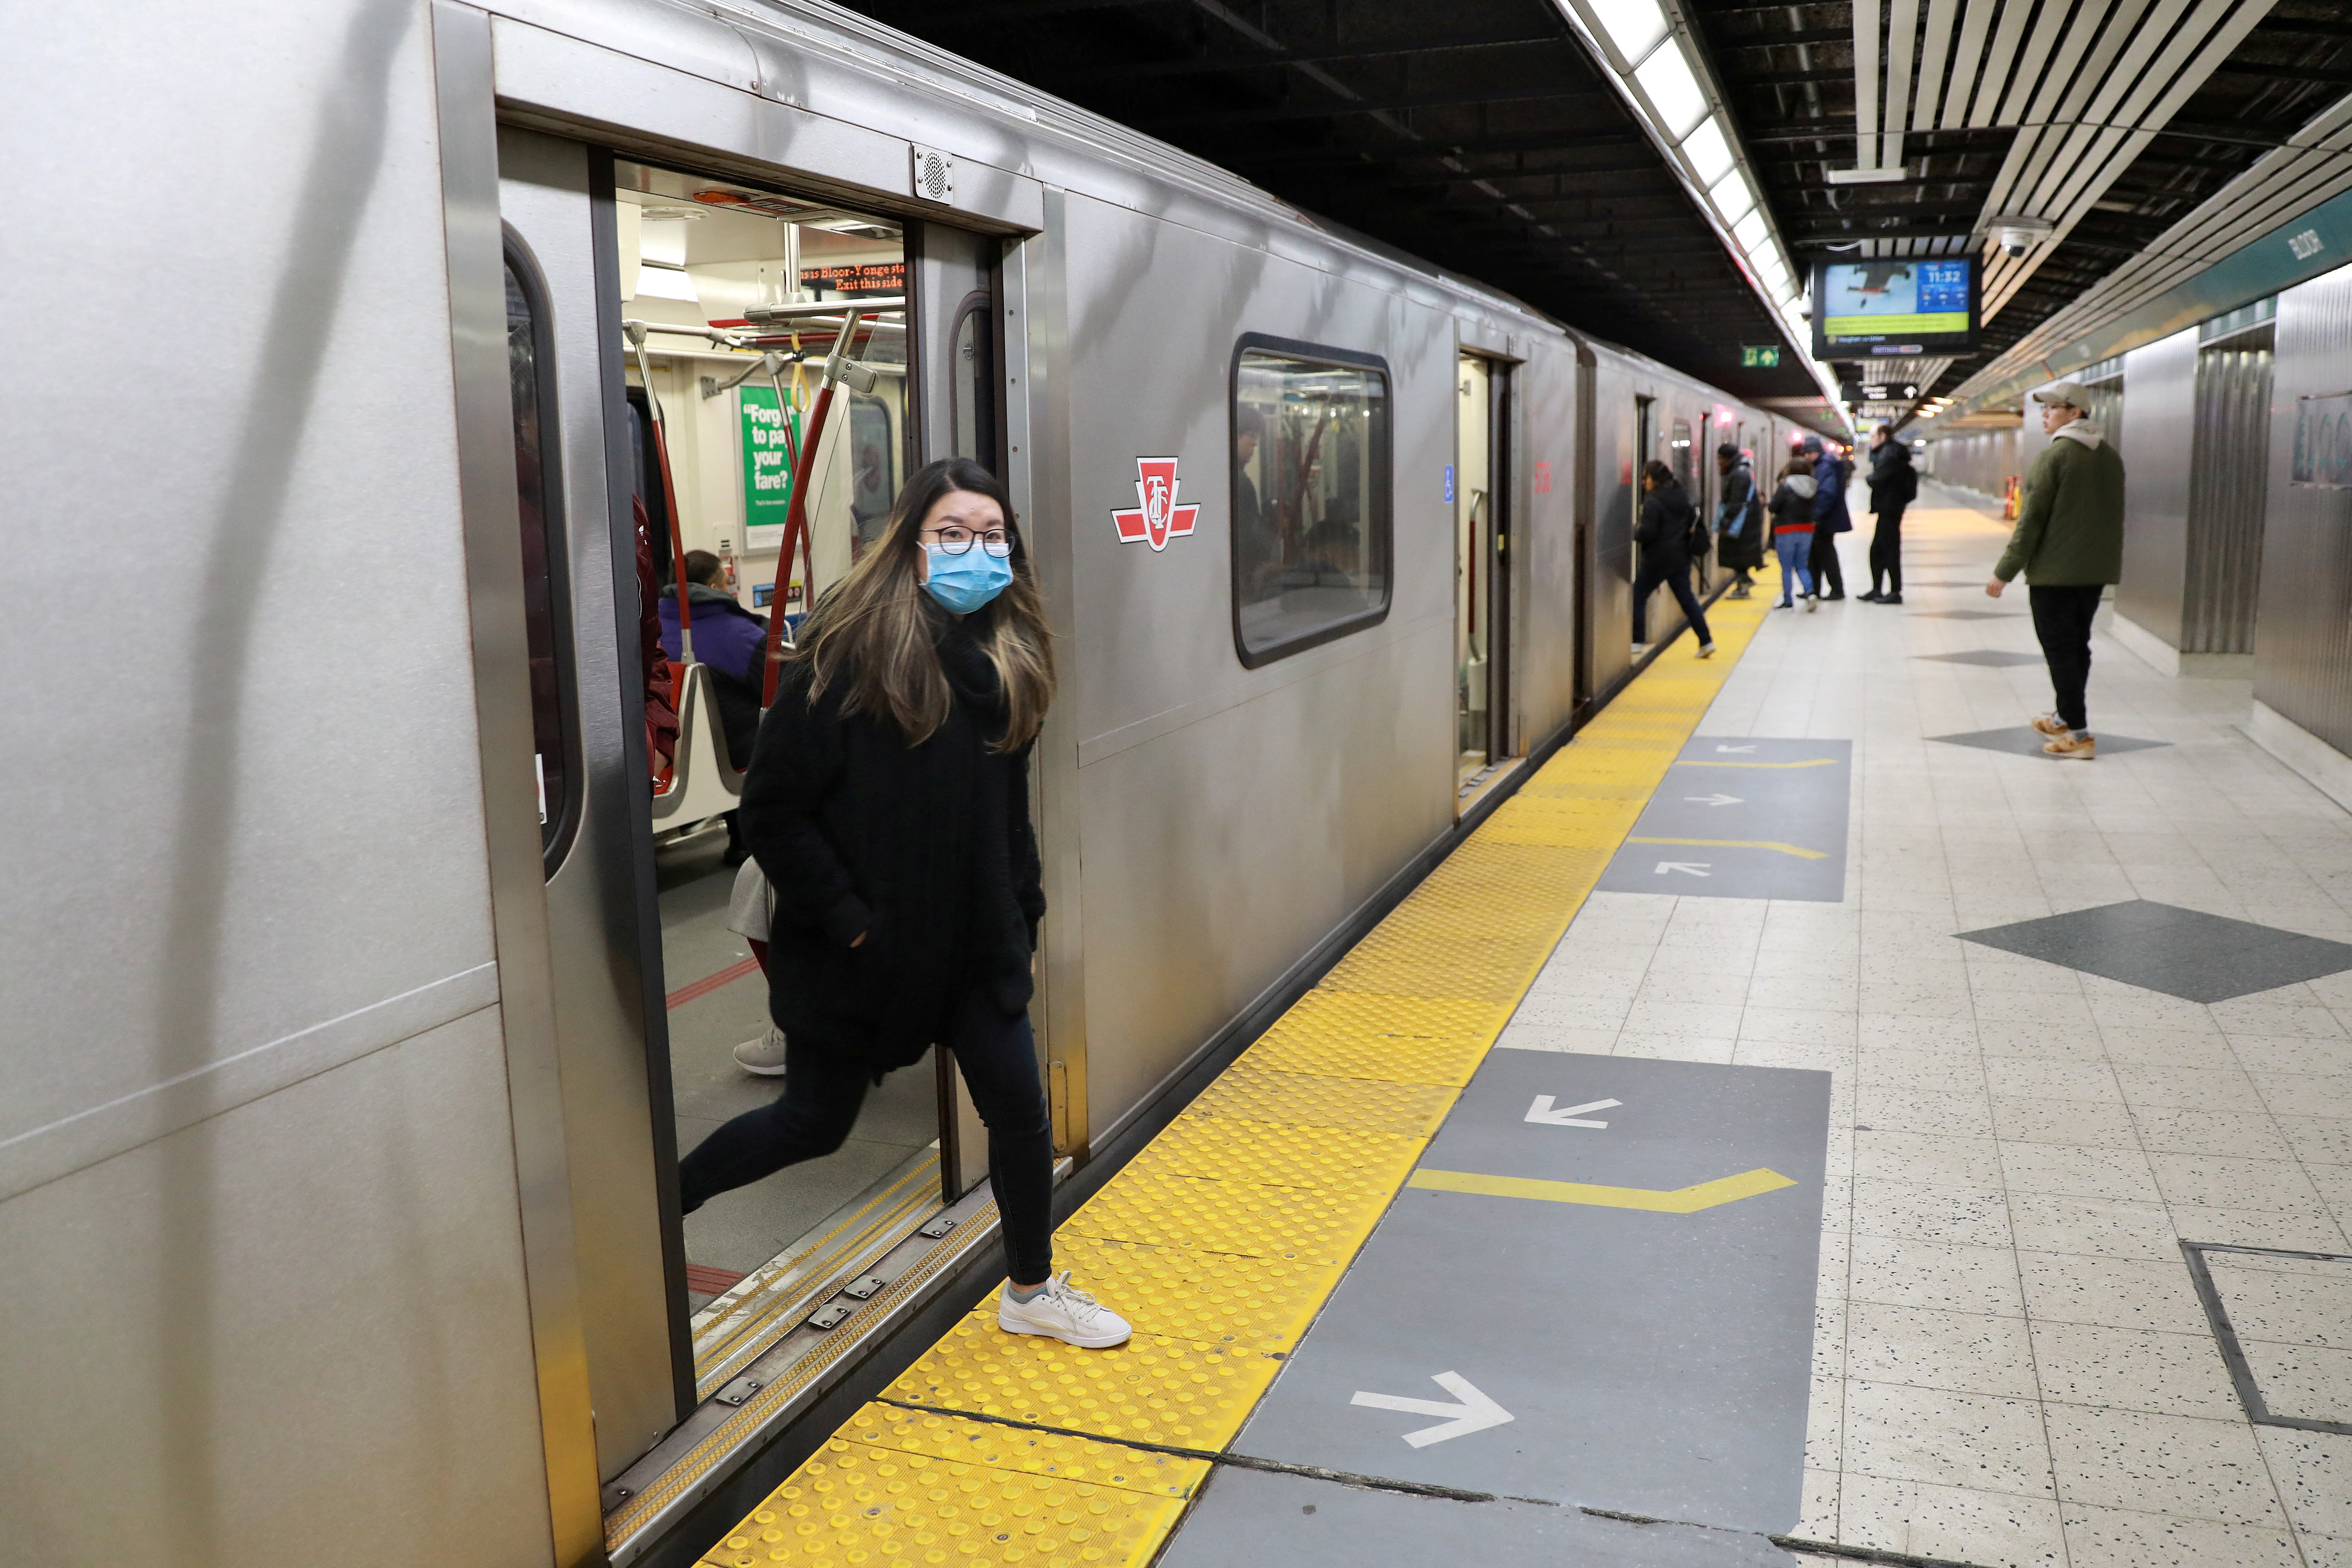 A woman wearing a mask exits a subway train in Toronto